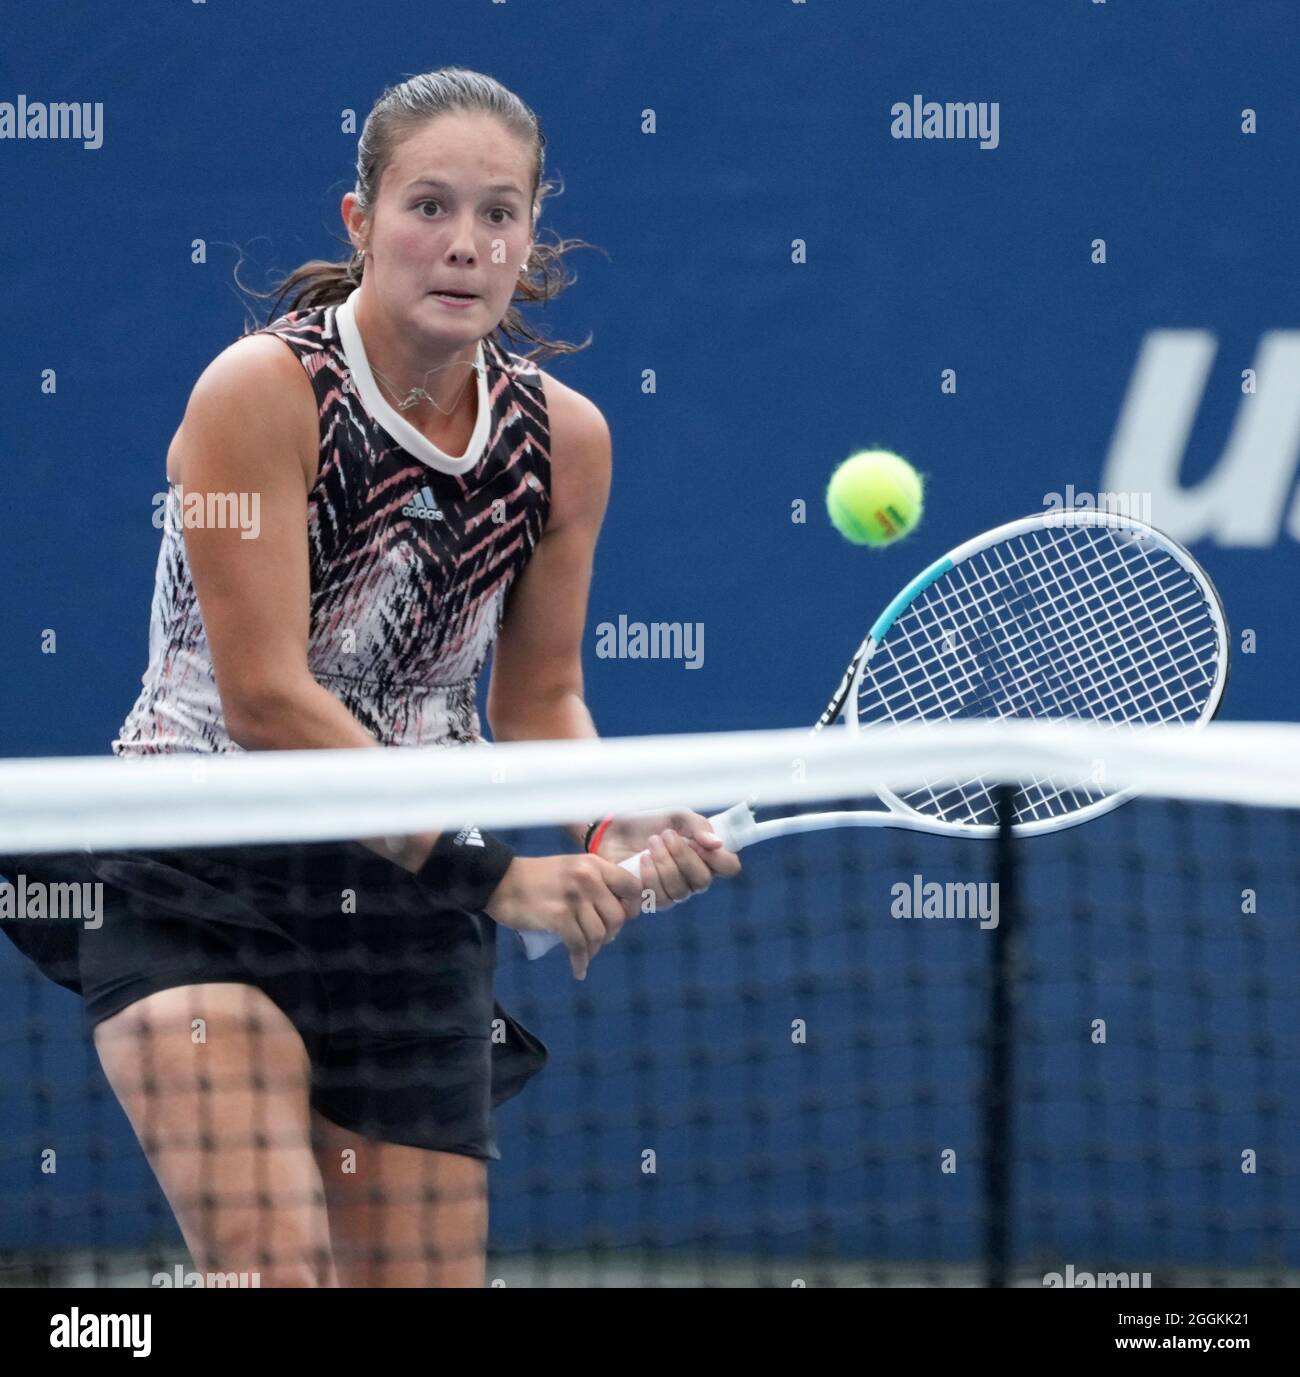 Flushing, Queens, New York, USA. 1st Sep, 2021. Daria Kasatkina (RUS)  defeated Marketa Vondrousova (CZE) 3-6, 6-4, 6-4, at the US Open being  played at Billy Jean King Ntional Tennis Center in